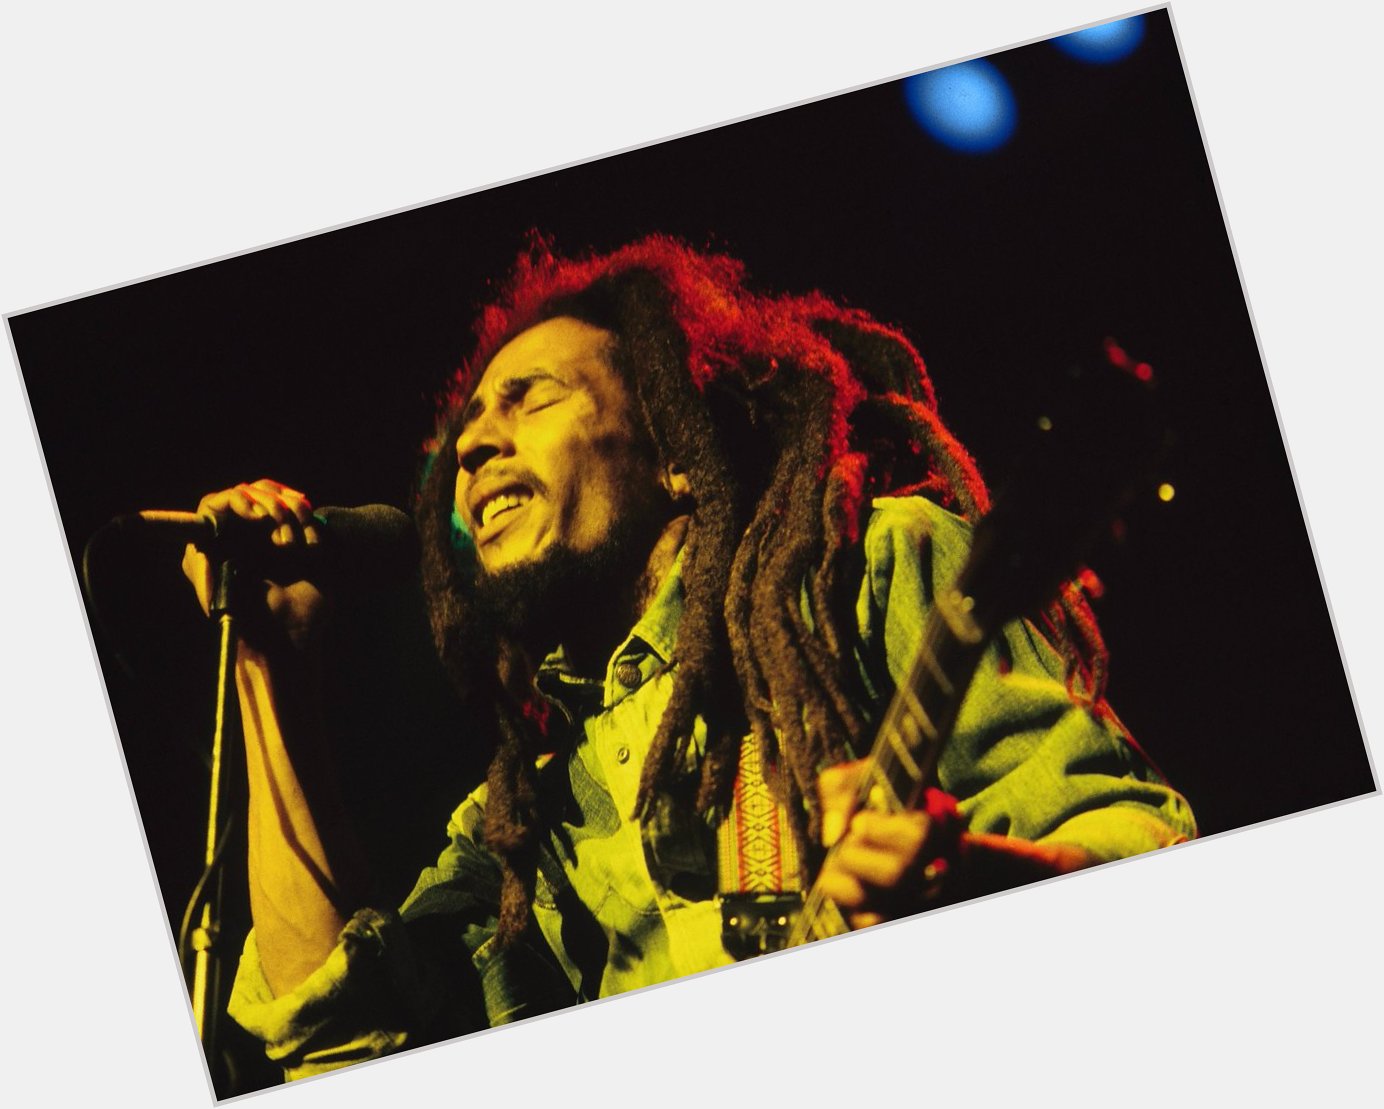 Happy Birthday Bob Marley, who would have turned 74 today. 